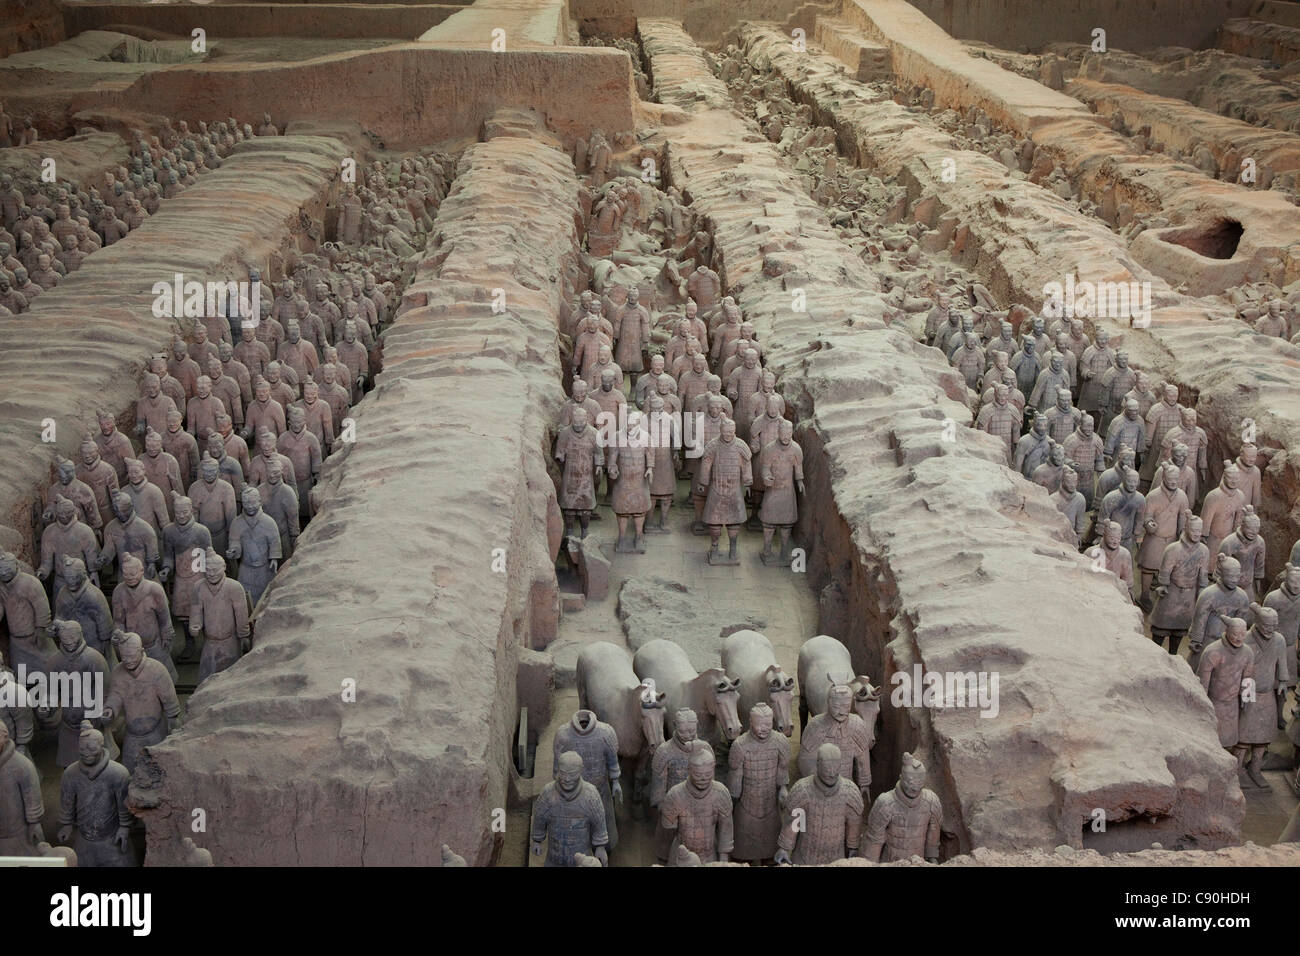 Soldiers of The Terracotta Army of the First Emperor of China near the mausoleum of Shi Huangdi near Xi'an Shaanxi Province Peop Stock Photo